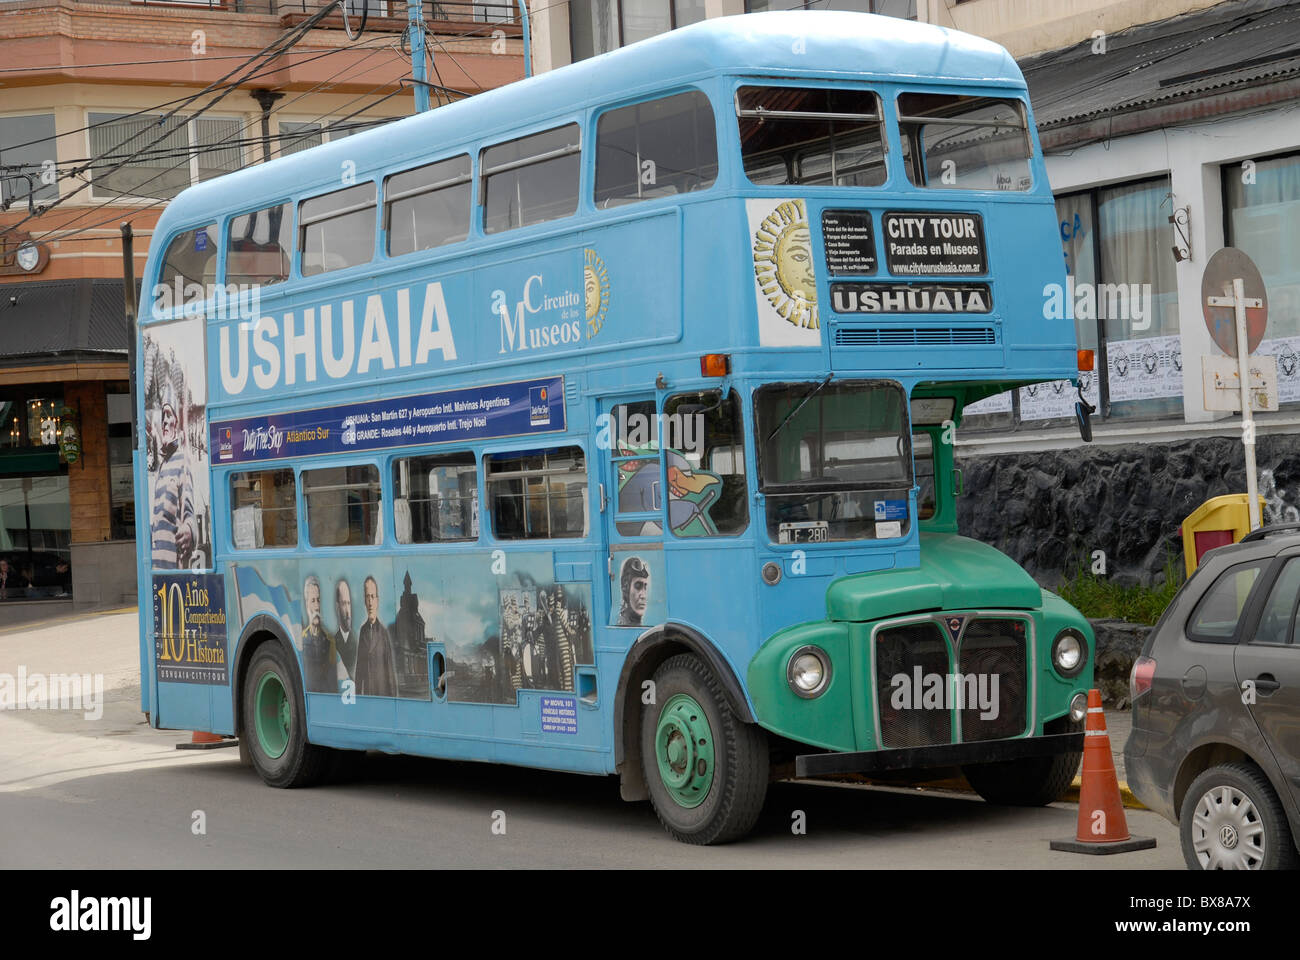 Old London double decker bus now used as sightseeing bus in Ushuaia, Tierra del Fuego, Argentina Stock Photo